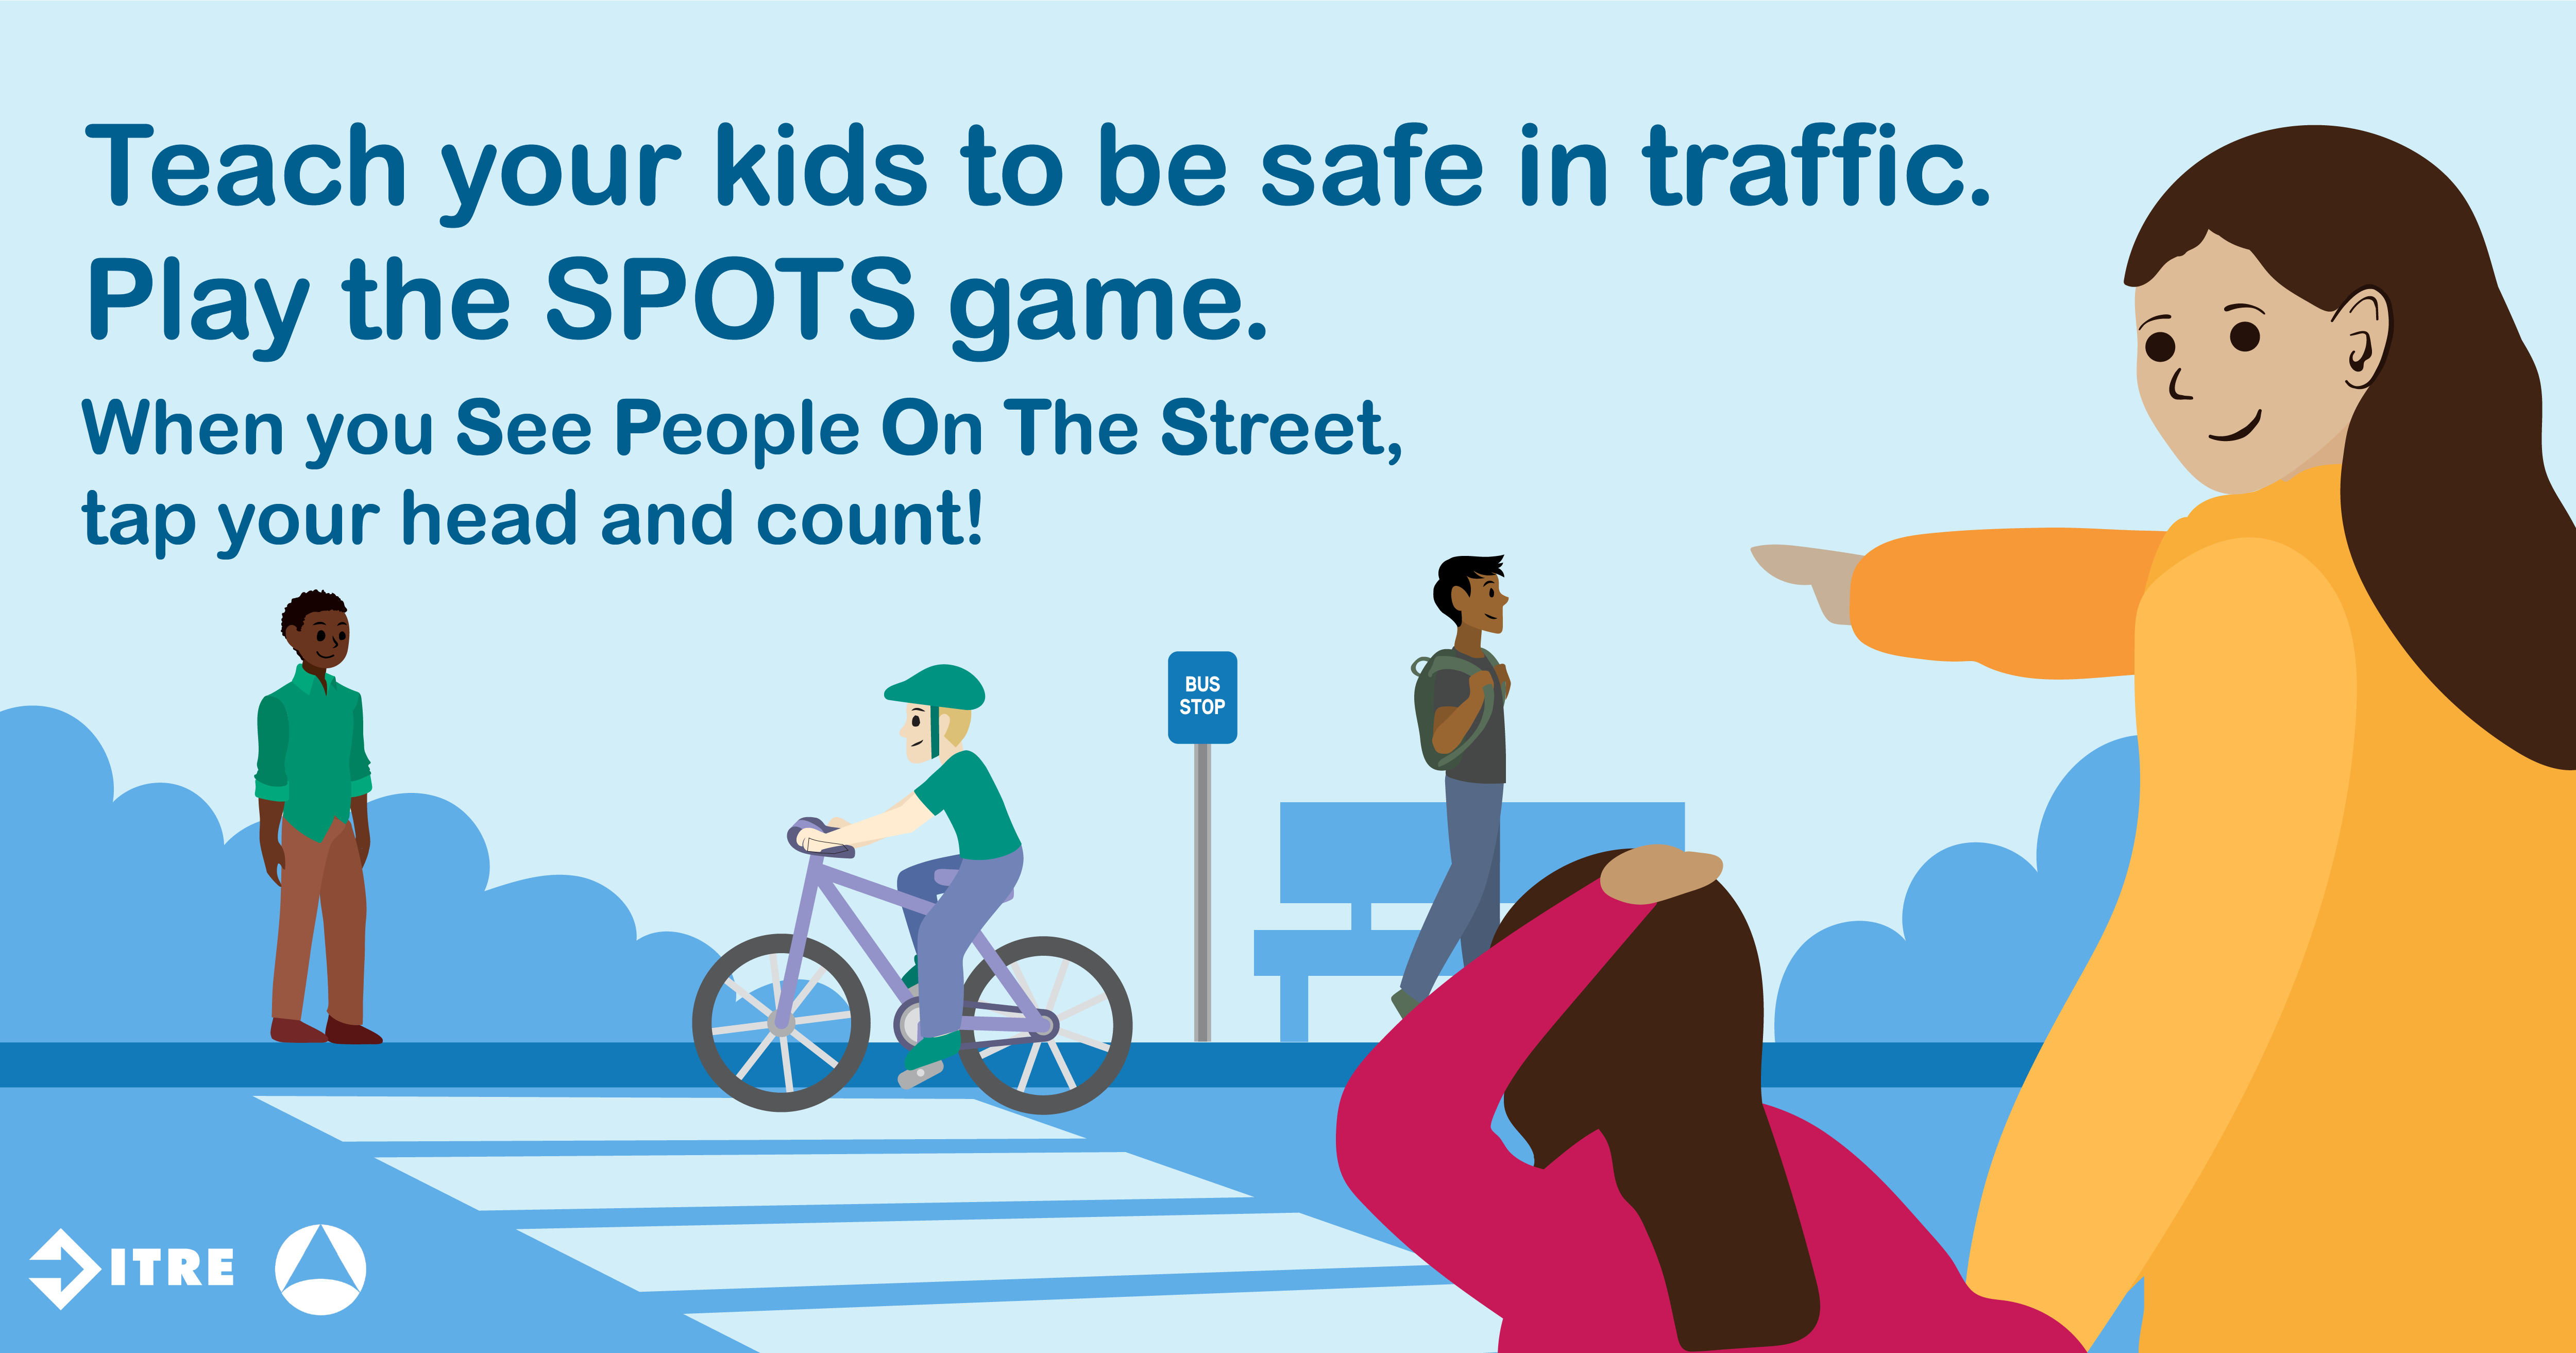 Graphic depicts mother and daughter waiting to cross a crosswalk. Mother points out pedestrians and bikers she spots while the daughter taps her head. Text reads “Teach your kids to be safe in traffic. Play the SPOTS game. When you see people on the street tap your head and count.”